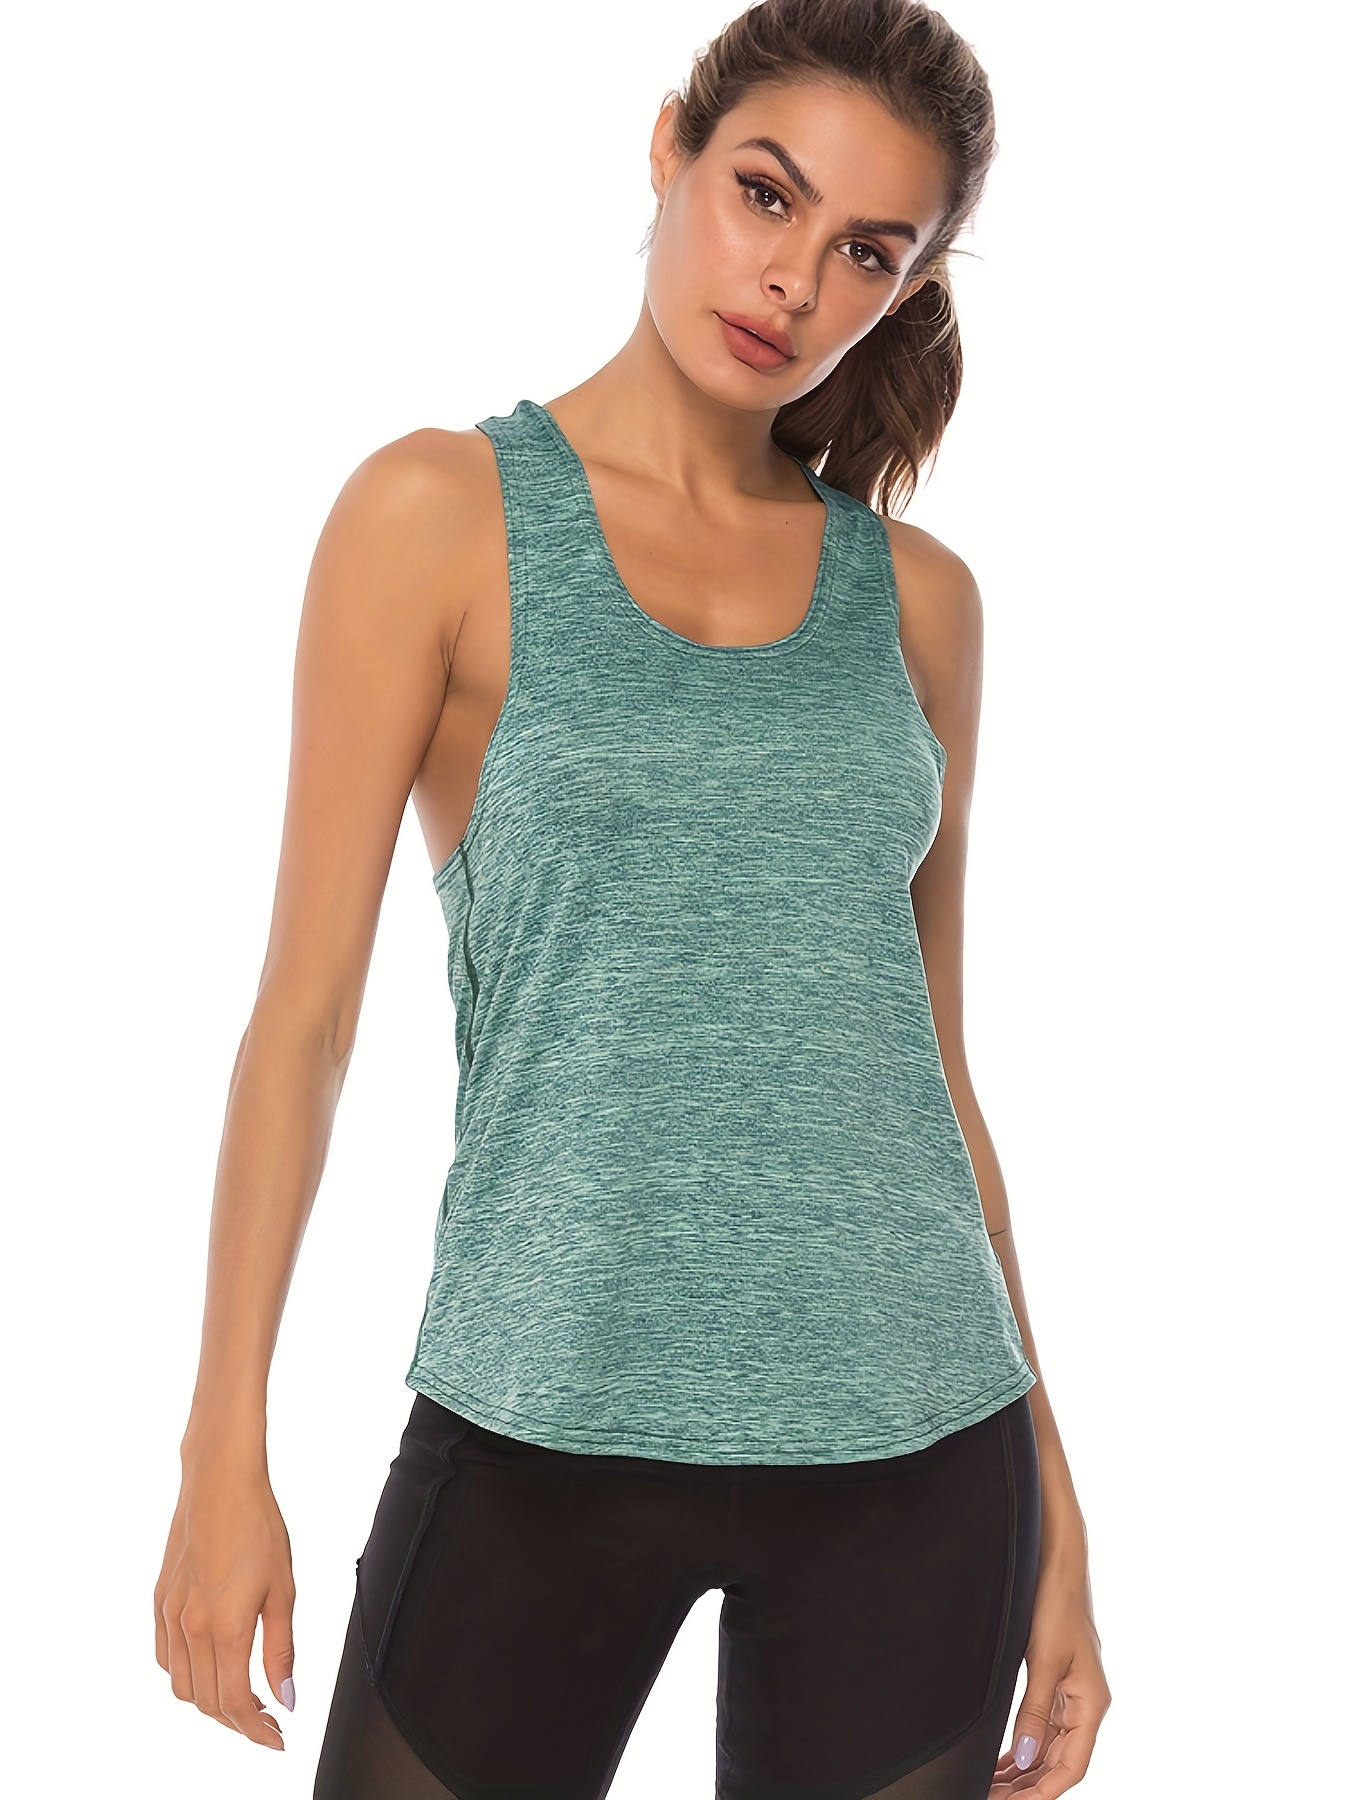 Racerback Tank Tops for Women Workout Tops Sleeveless Athletic Tank Top  Yoga Wear Esg16132 - China Tops and Tank Top price